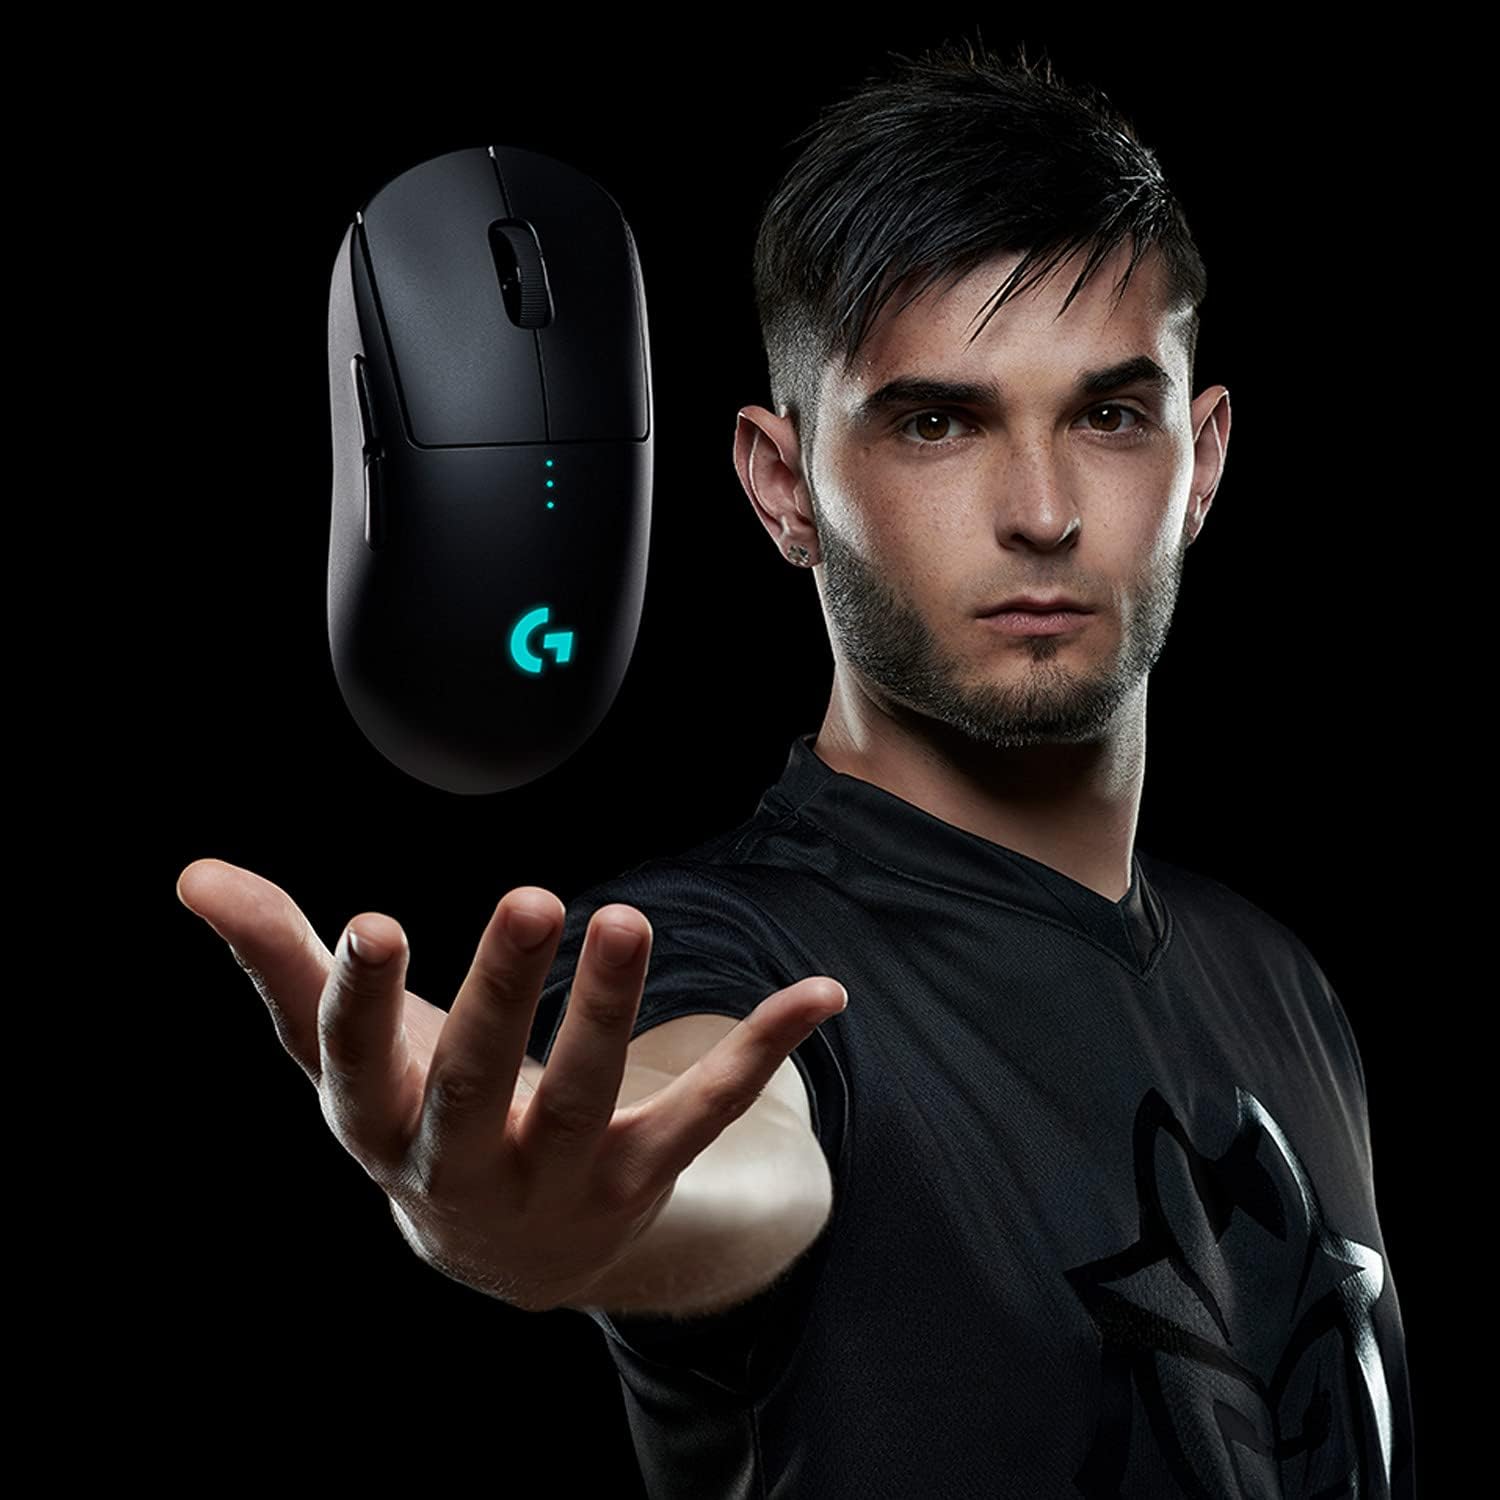 Logitech G Pro Wireless Gaming Mouse | Color Black | Best Gaming Accessories in Bahrain | Halabh